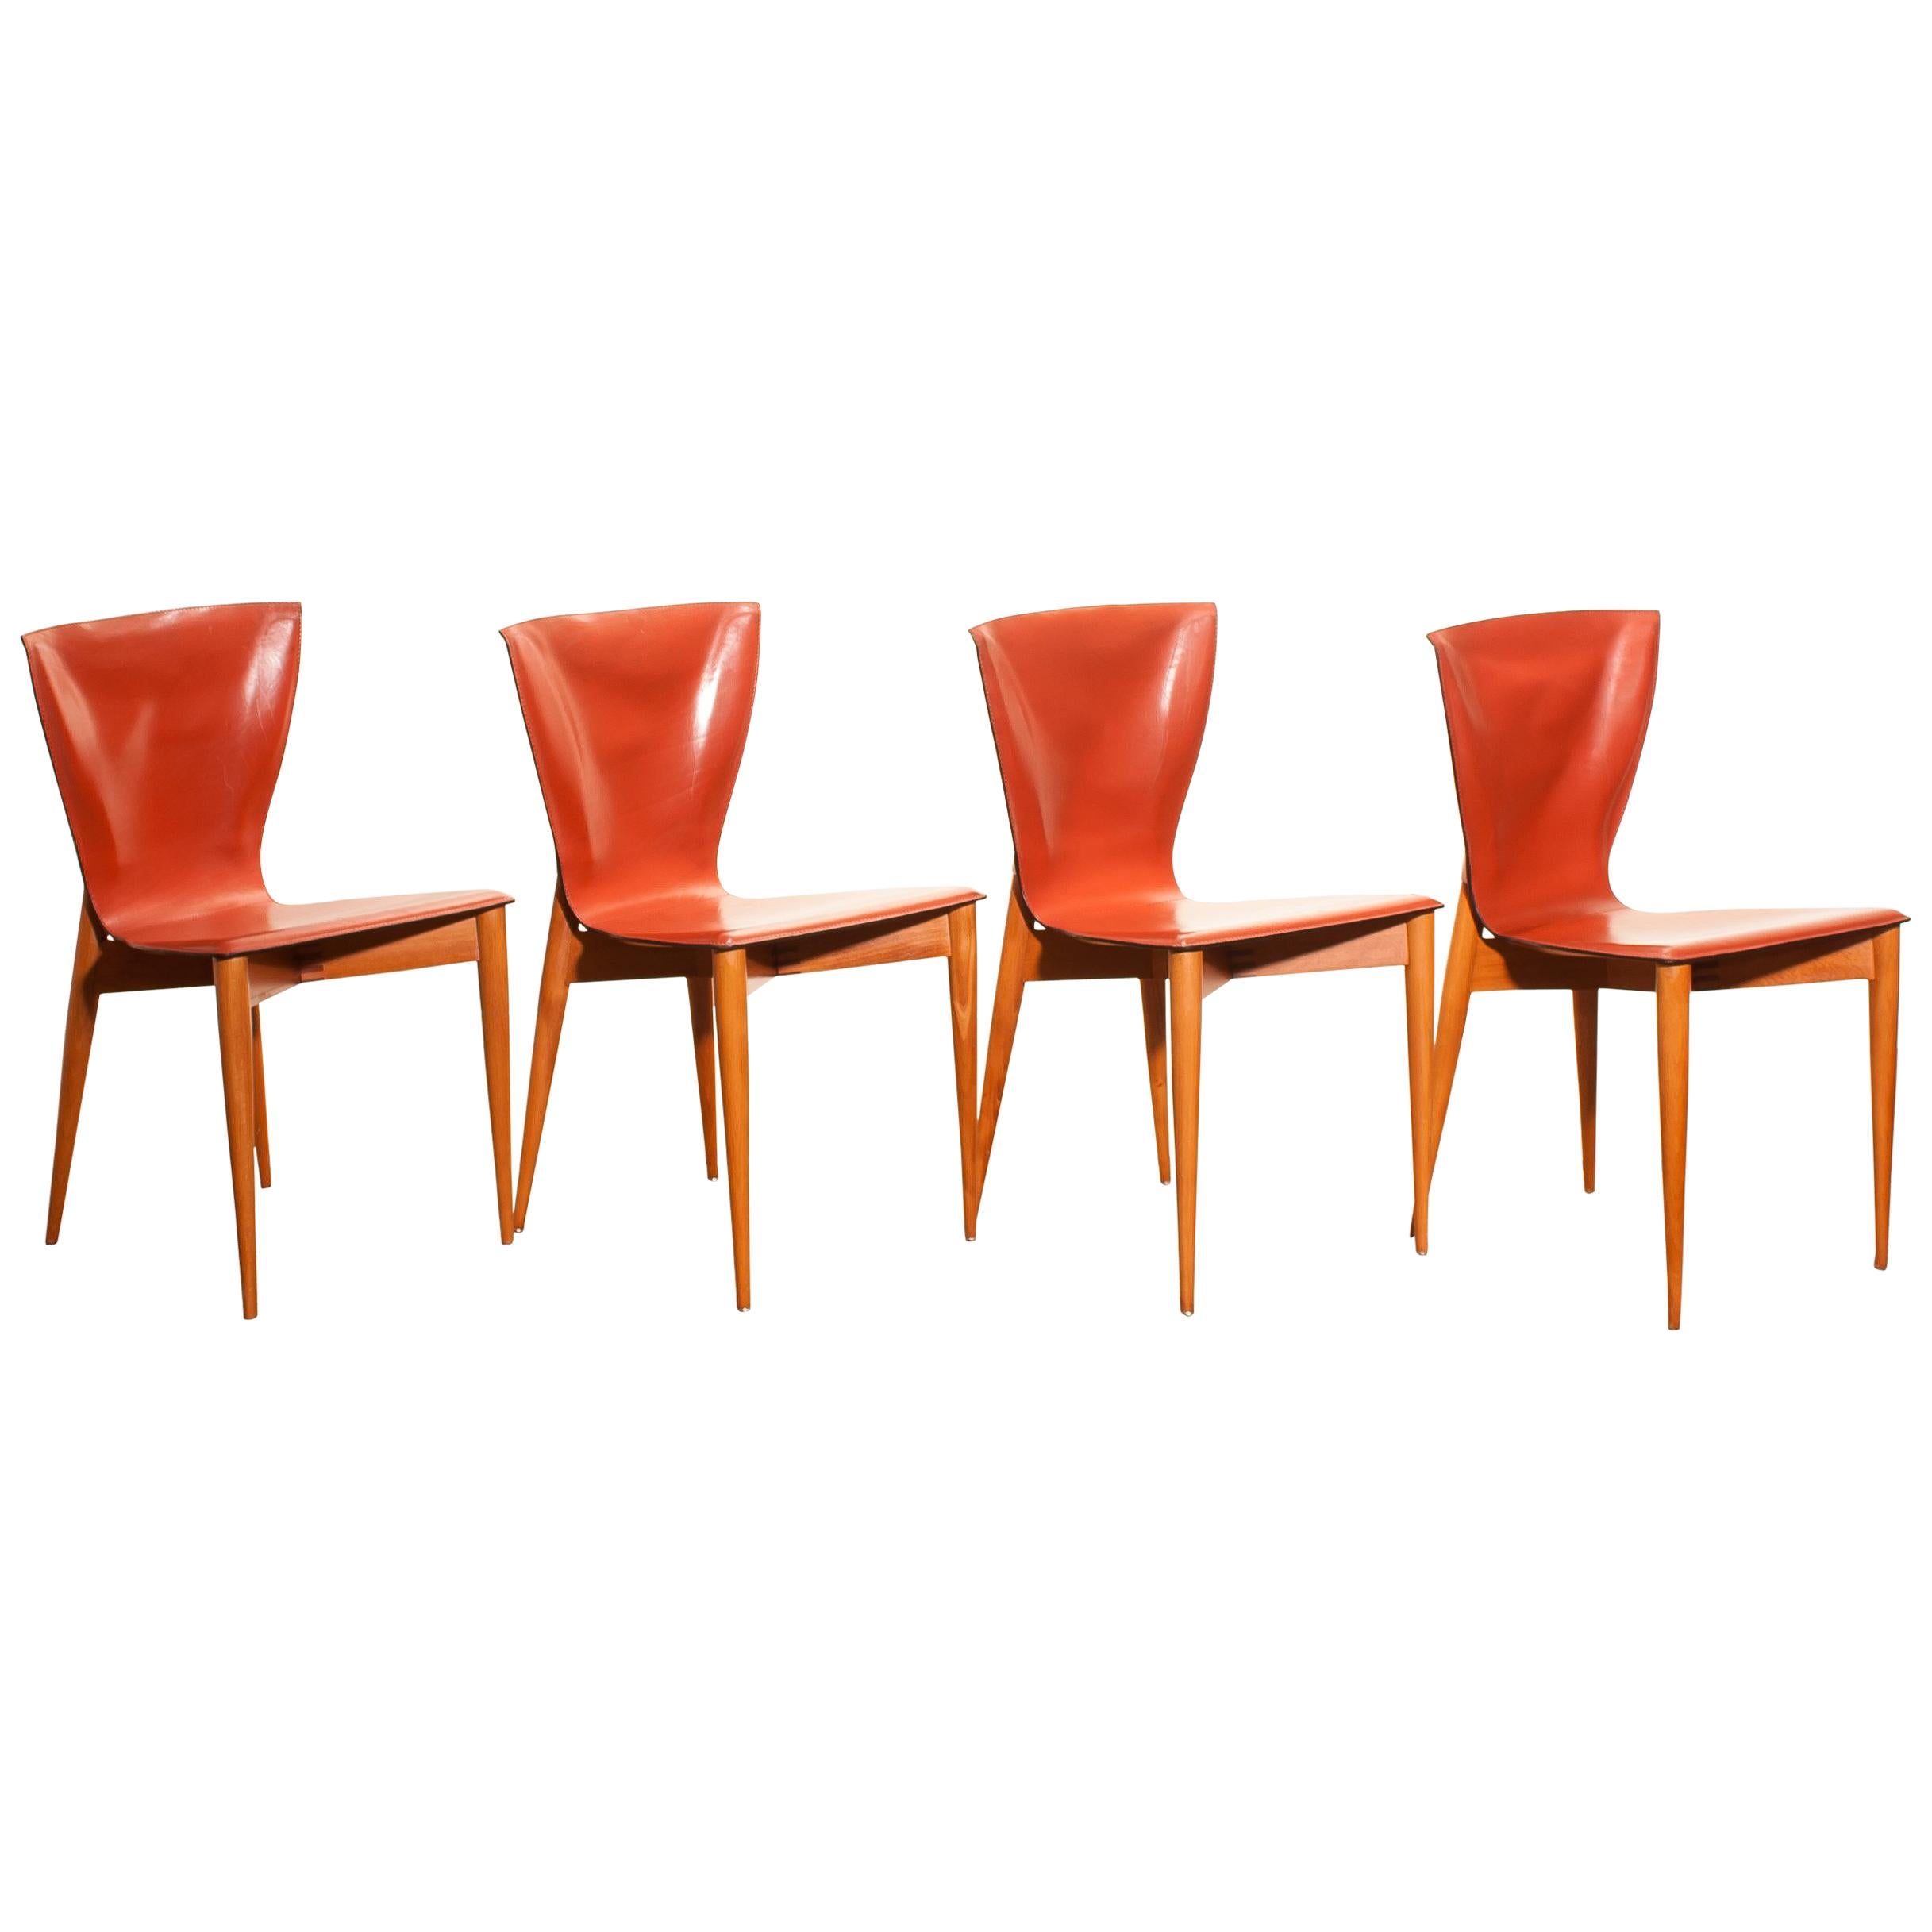 1970s Set of Four 'Vela' Dining Chairs by Carlo Bartoli for Matteo Grassi